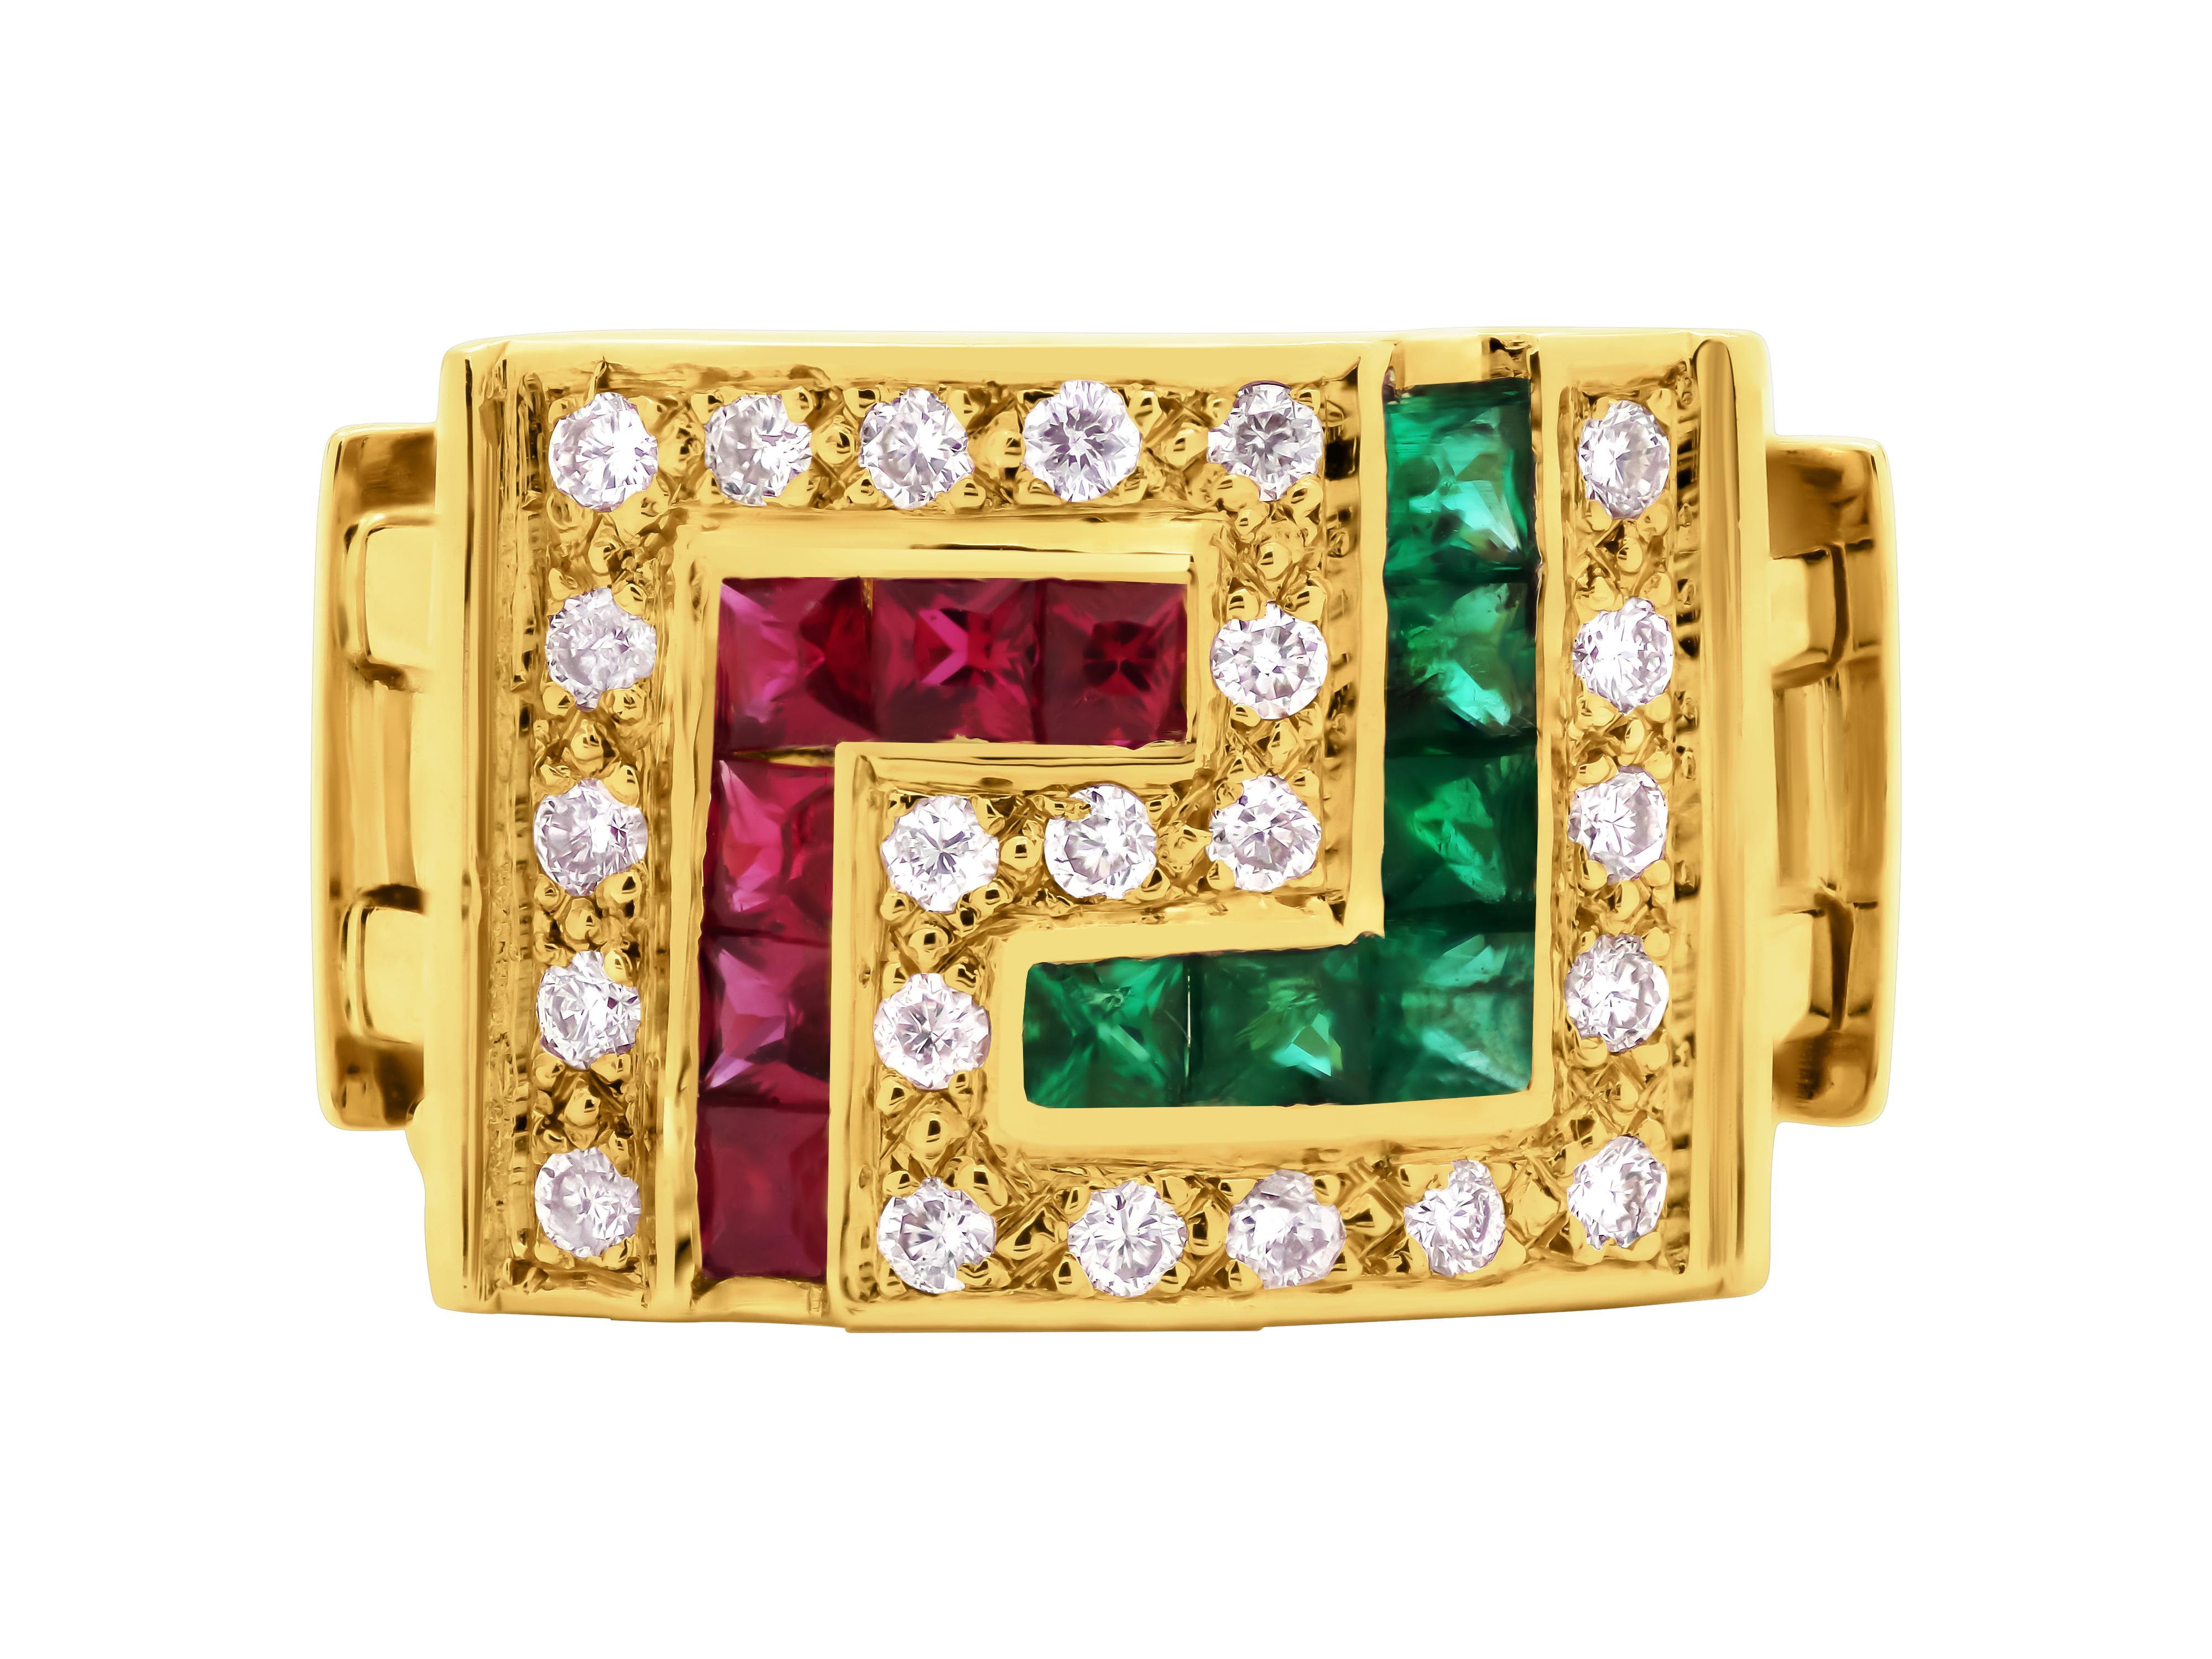 Greek key ring in 18 karats yellow gold set with 0.72 carats of Rubies and Emeralds. The frame around it is the pave setting with 0.28 carats brilliant cut diamonds that adds light and luxury to the piece.